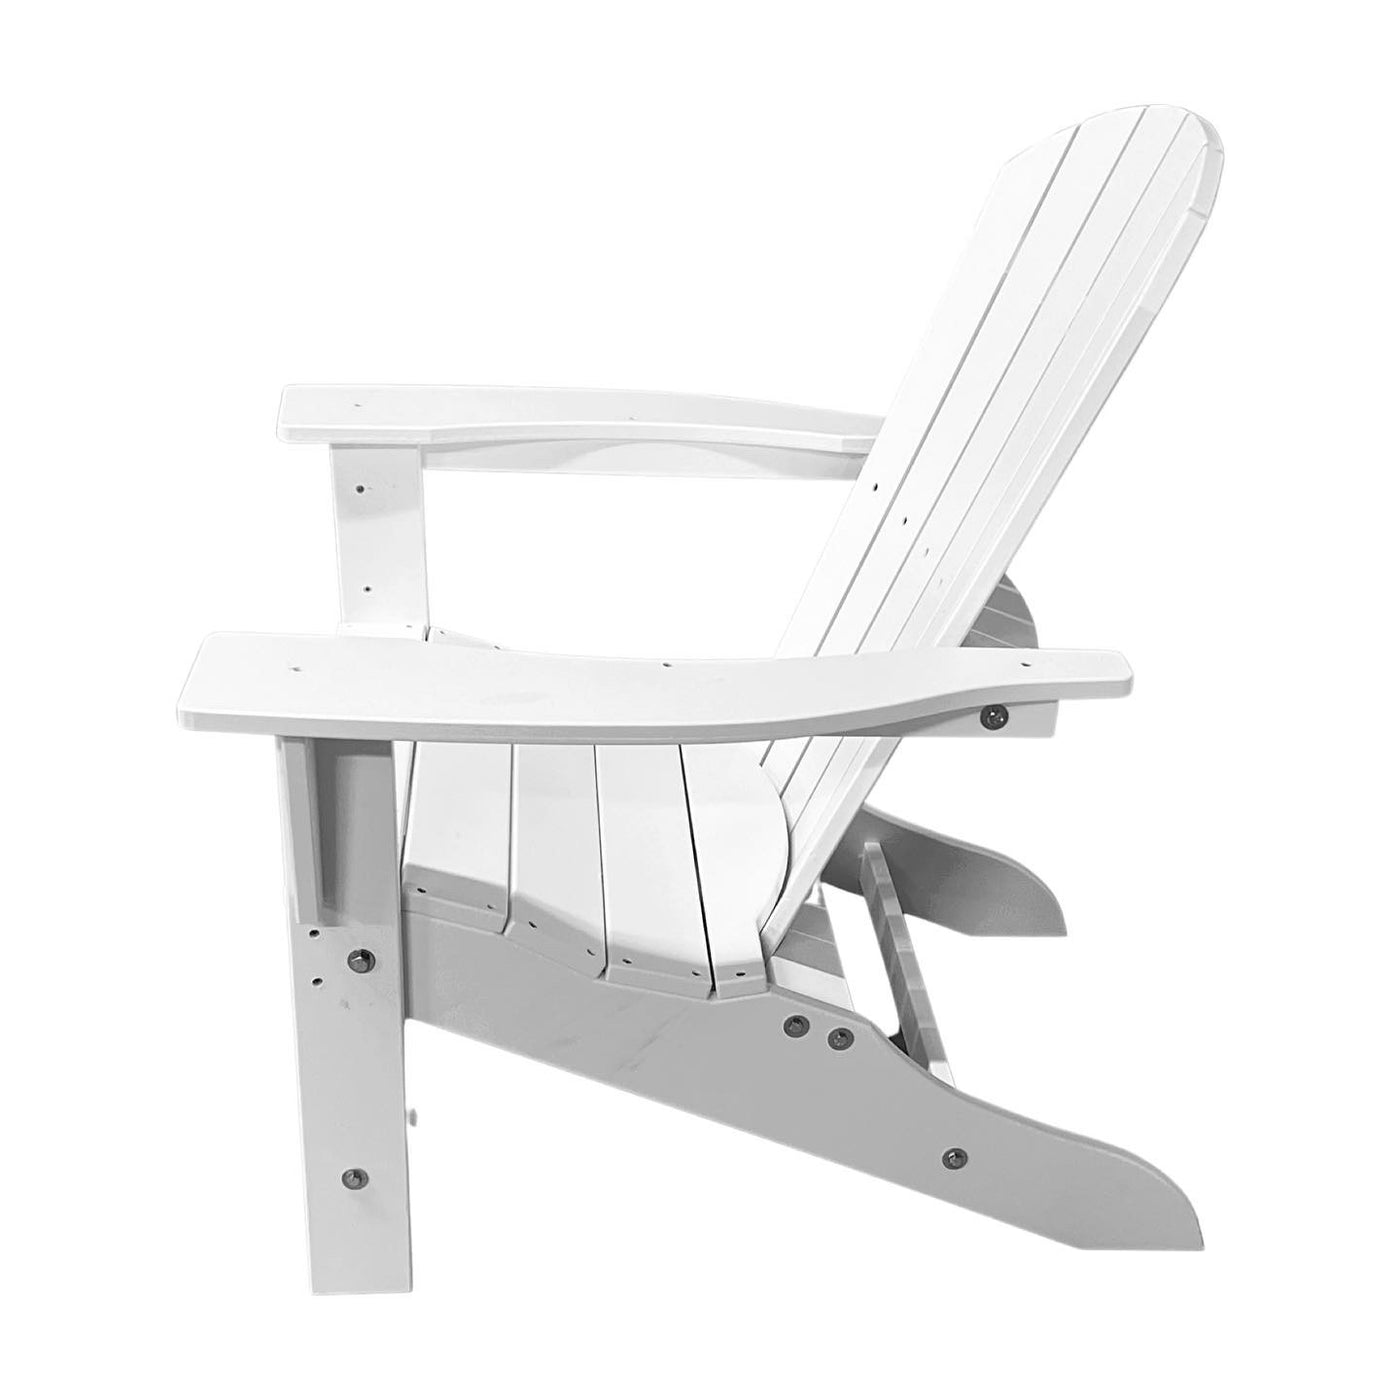 Outdoor Poly Adirondack Chair